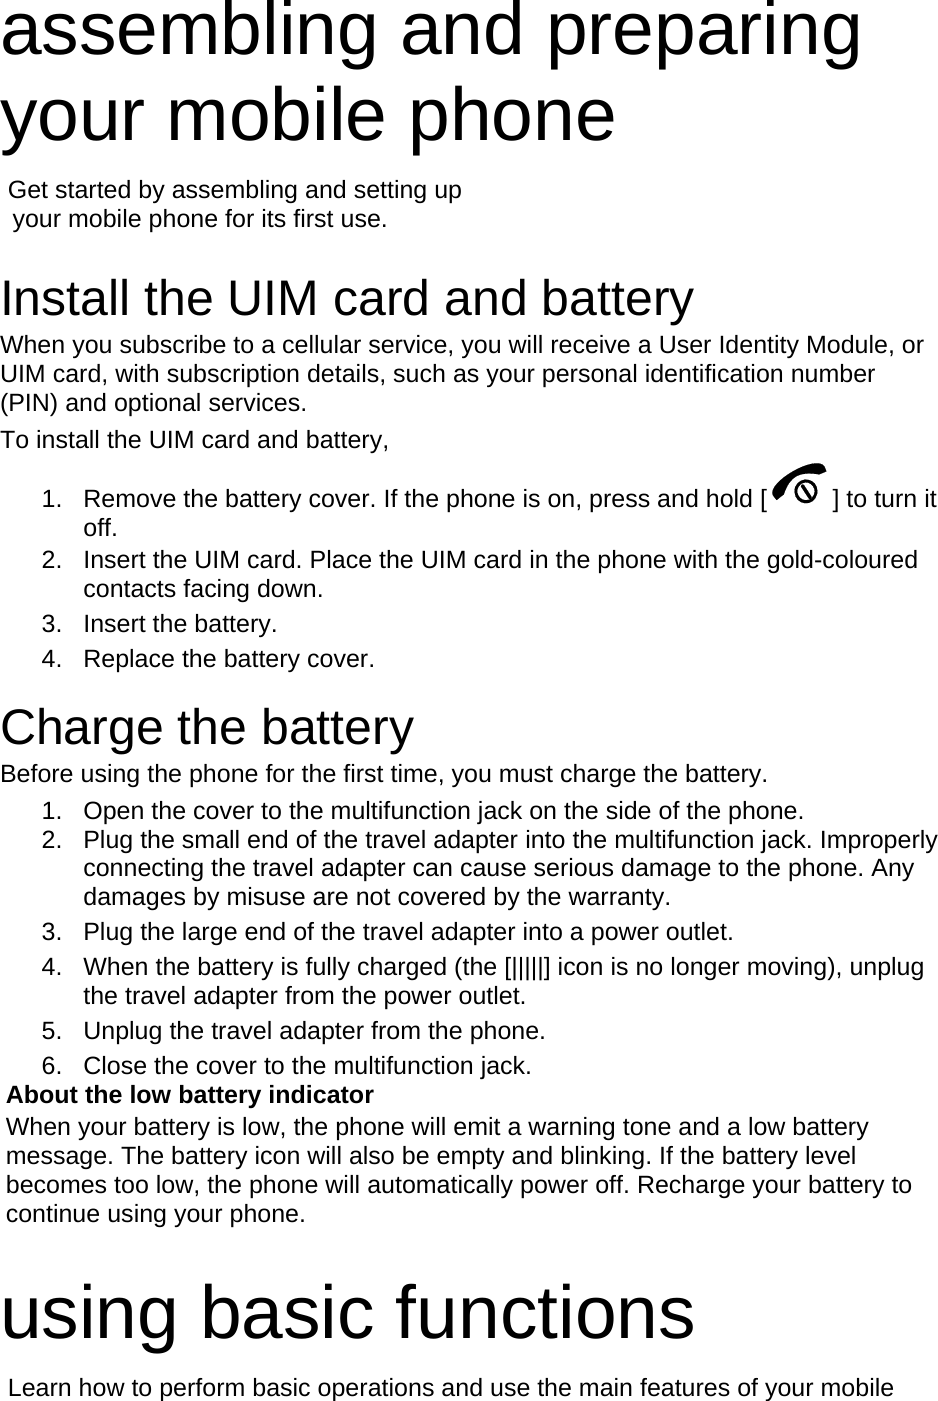 assembling and preparing your mobile phone    Get started by assembling and setting up     your mobile phone for its first use.  Install the UIM card and battery When you subscribe to a cellular service, you will receive a User Identity Module, or UIM card, with subscription details, such as your personal identification number (PIN) and optional services. To install the UIM card and battery, 1.  Remove the battery cover. If the phone is on, press and hold [ ] to turn it off. 2.  Insert the UIM card. Place the UIM card in the phone with the gold-coloured contacts facing down. 3. Insert the battery. 4.  Replace the battery cover.  Charge the battery Before using the phone for the first time, you must charge the battery. 1.  Open the cover to the multifunction jack on the side of the phone. 2.  Plug the small end of the travel adapter into the multifunction jack. Improperly connecting the travel adapter can cause serious damage to the phone. Any damages by misuse are not covered by the warranty. 3.  Plug the large end of the travel adapter into a power outlet. 4.  When the battery is fully charged (the [|||||] icon is no longer moving), unplug the travel adapter from the power outlet. 5.  Unplug the travel adapter from the phone. 6.  Close the cover to the multifunction jack. About the low battery indicator When your battery is low, the phone will emit a warning tone and a low battery message. The battery icon will also be empty and blinking. If the battery level becomes too low, the phone will automatically power off. Recharge your battery to continue using your phone.  using basic functions  Learn how to perform basic operations and use the main features of your mobile 